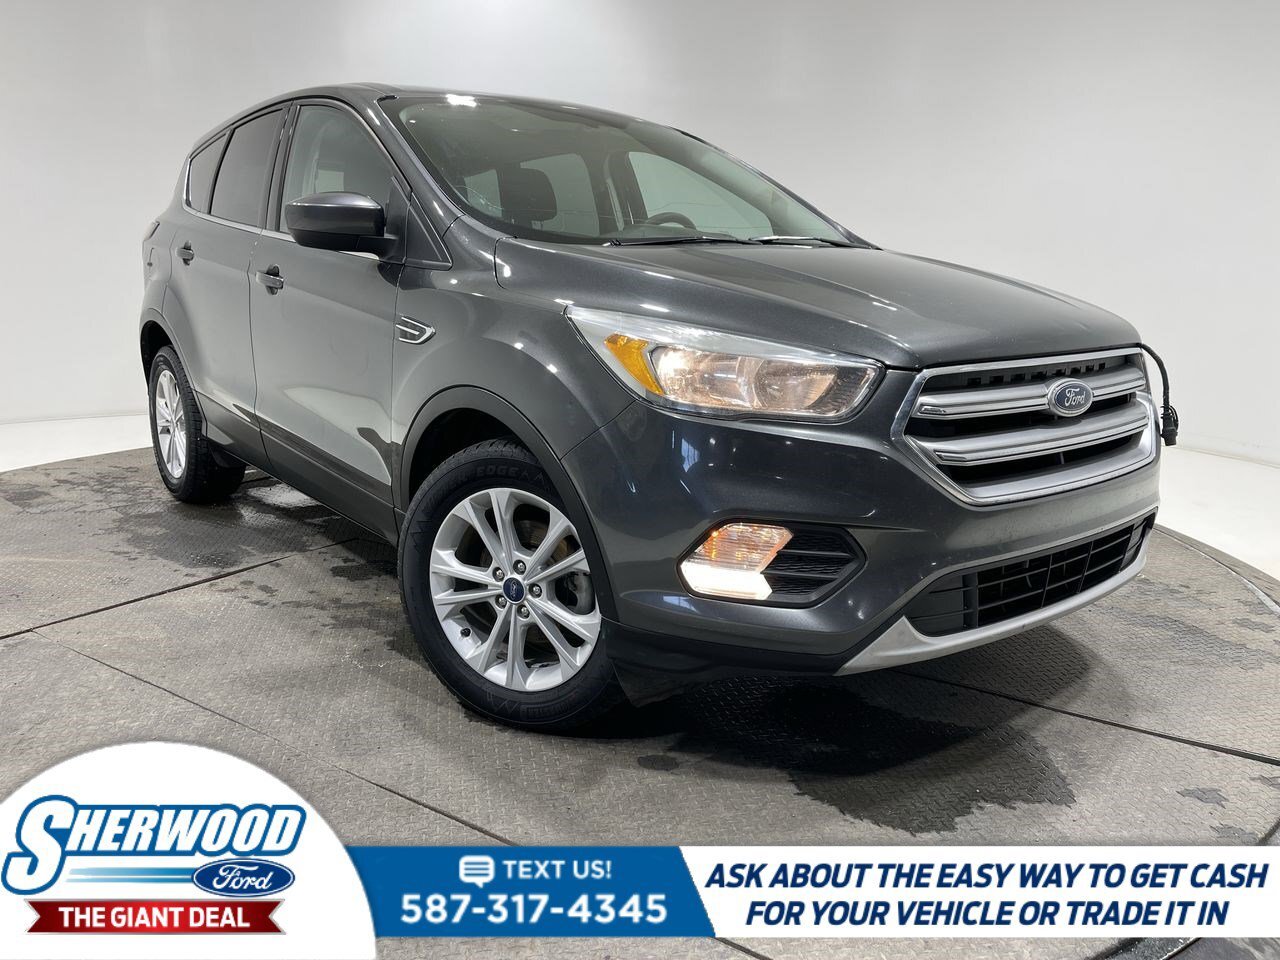 2017 Ford Escape SE- $0 Down $88 Weekly - NEW BRAKES & TIRES